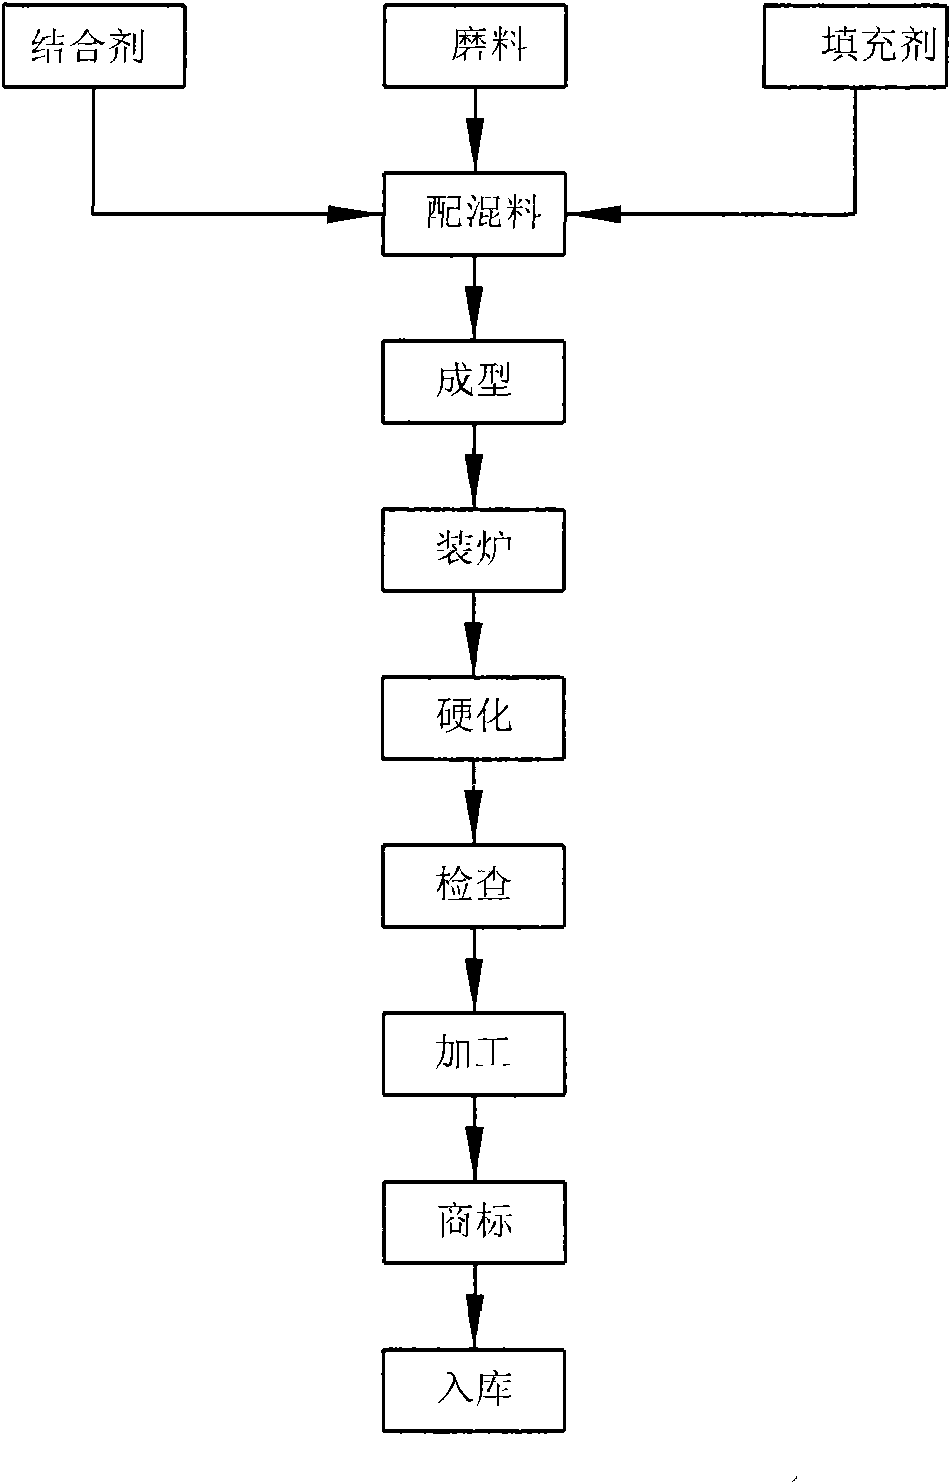 Fiber-reinforced resin heat-resistant high-speed abrasive cutting wheel and processing method thereof